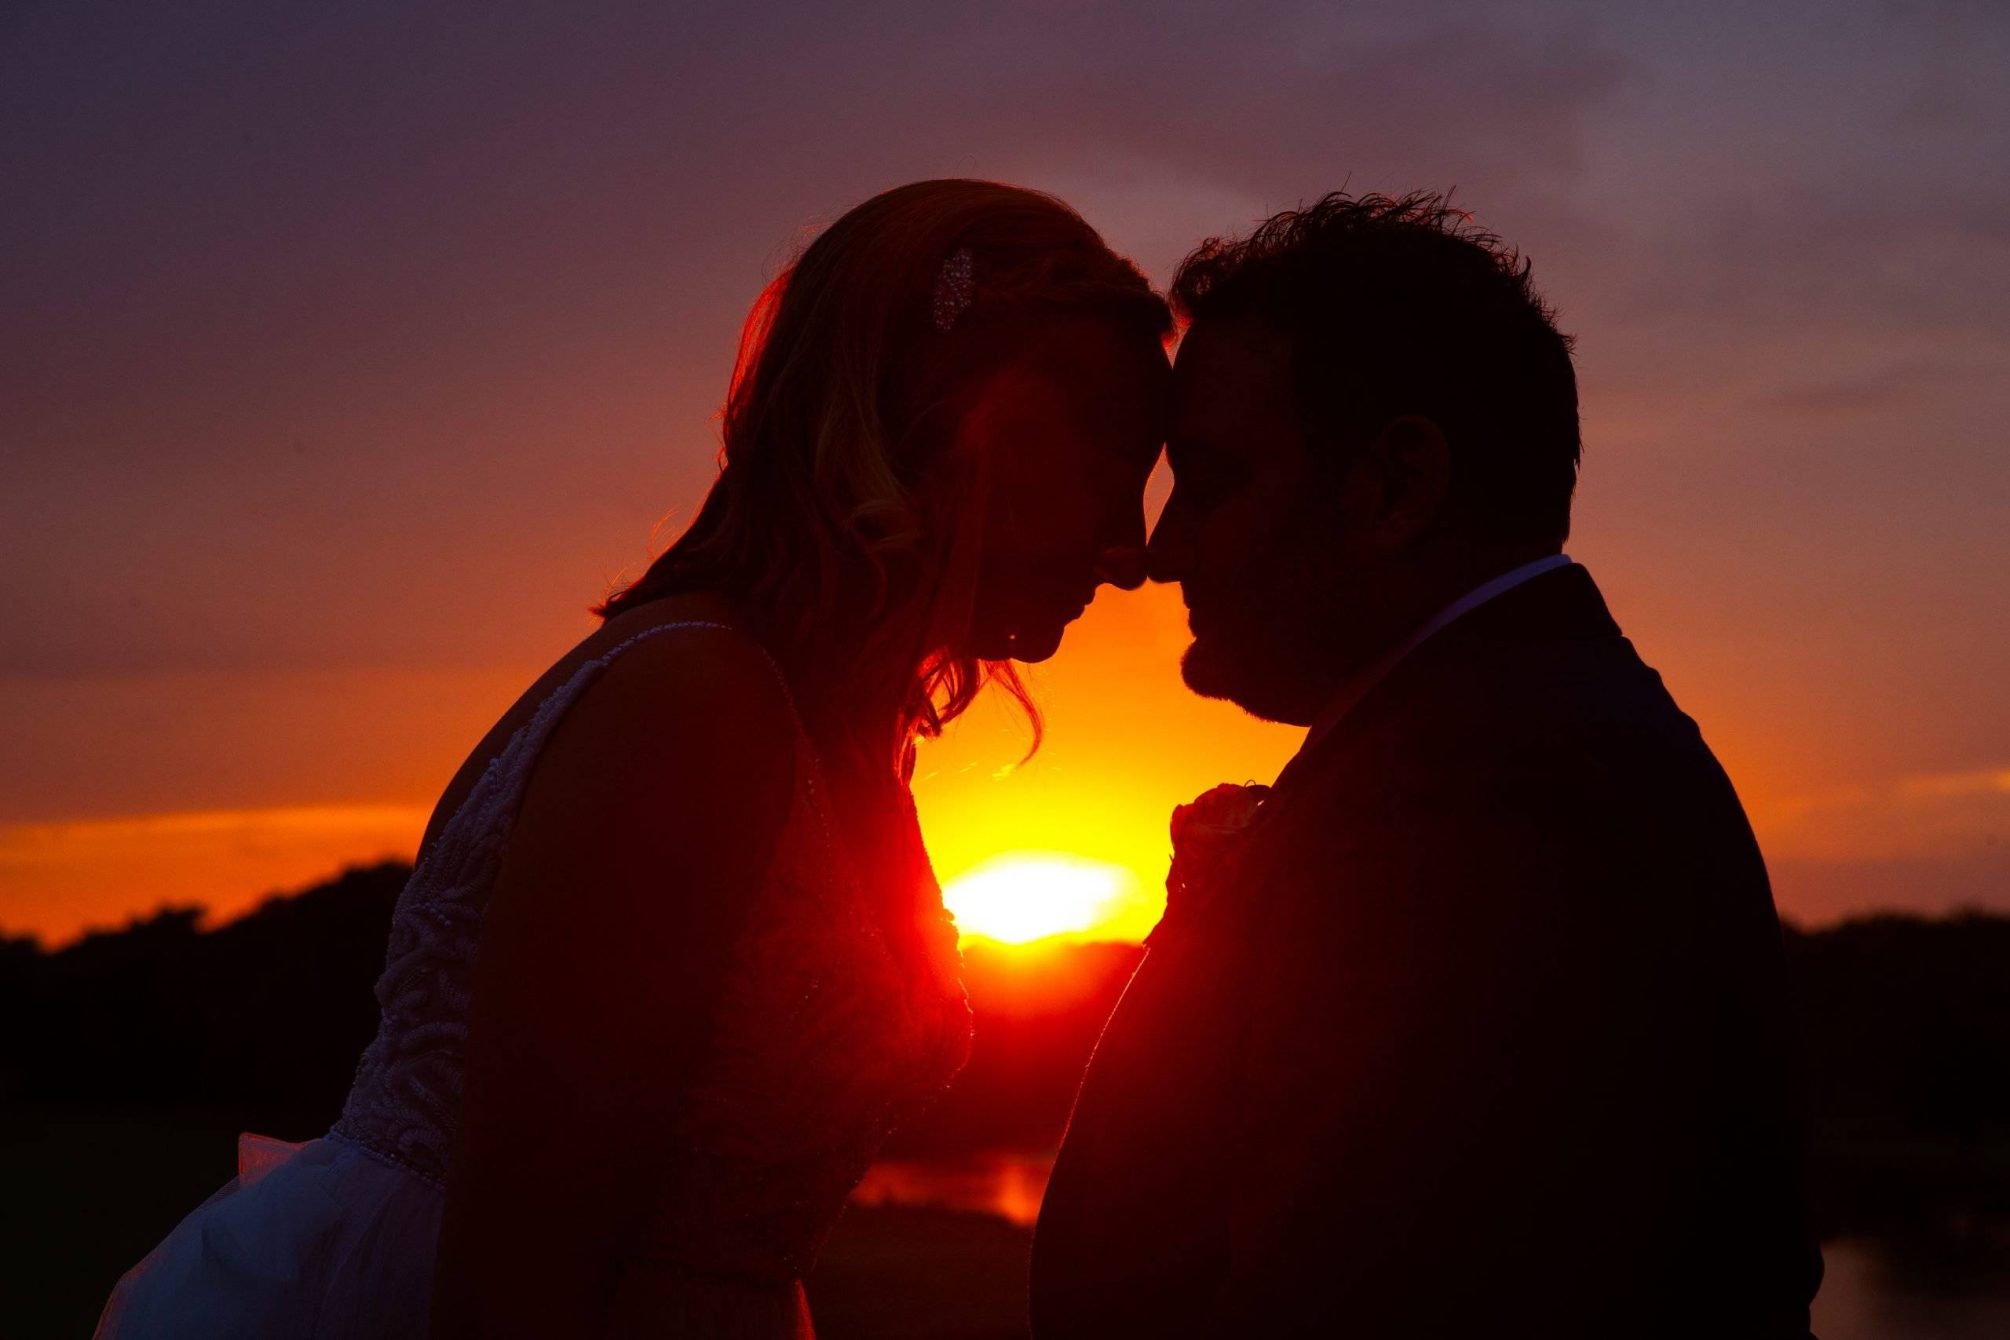 Brooklake bride and groom by sunset